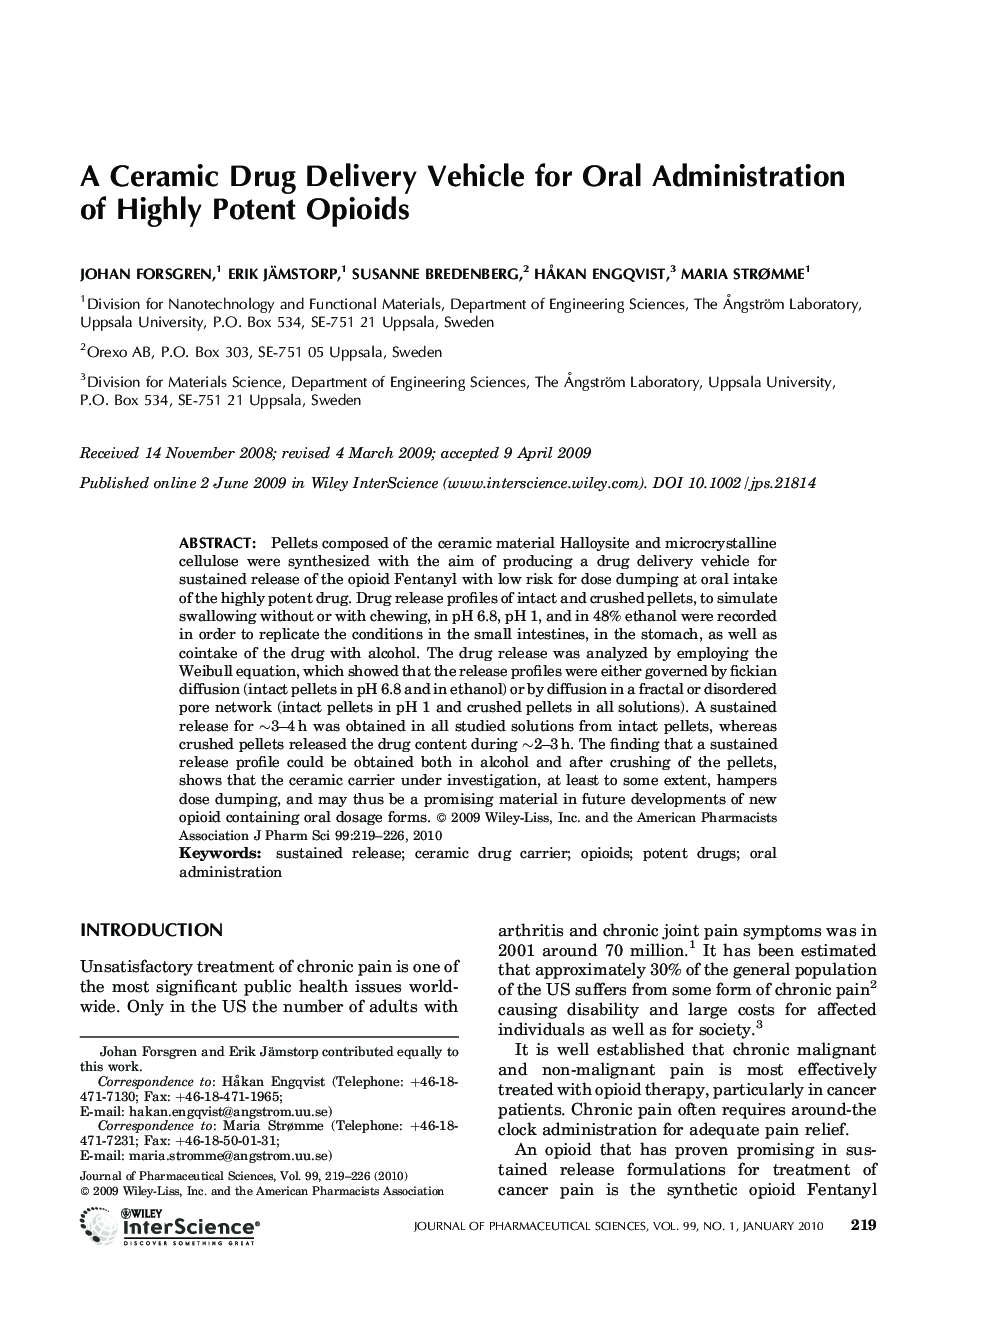 A ceramic drug delivery vehicle for oral administration of highly potent opioids*